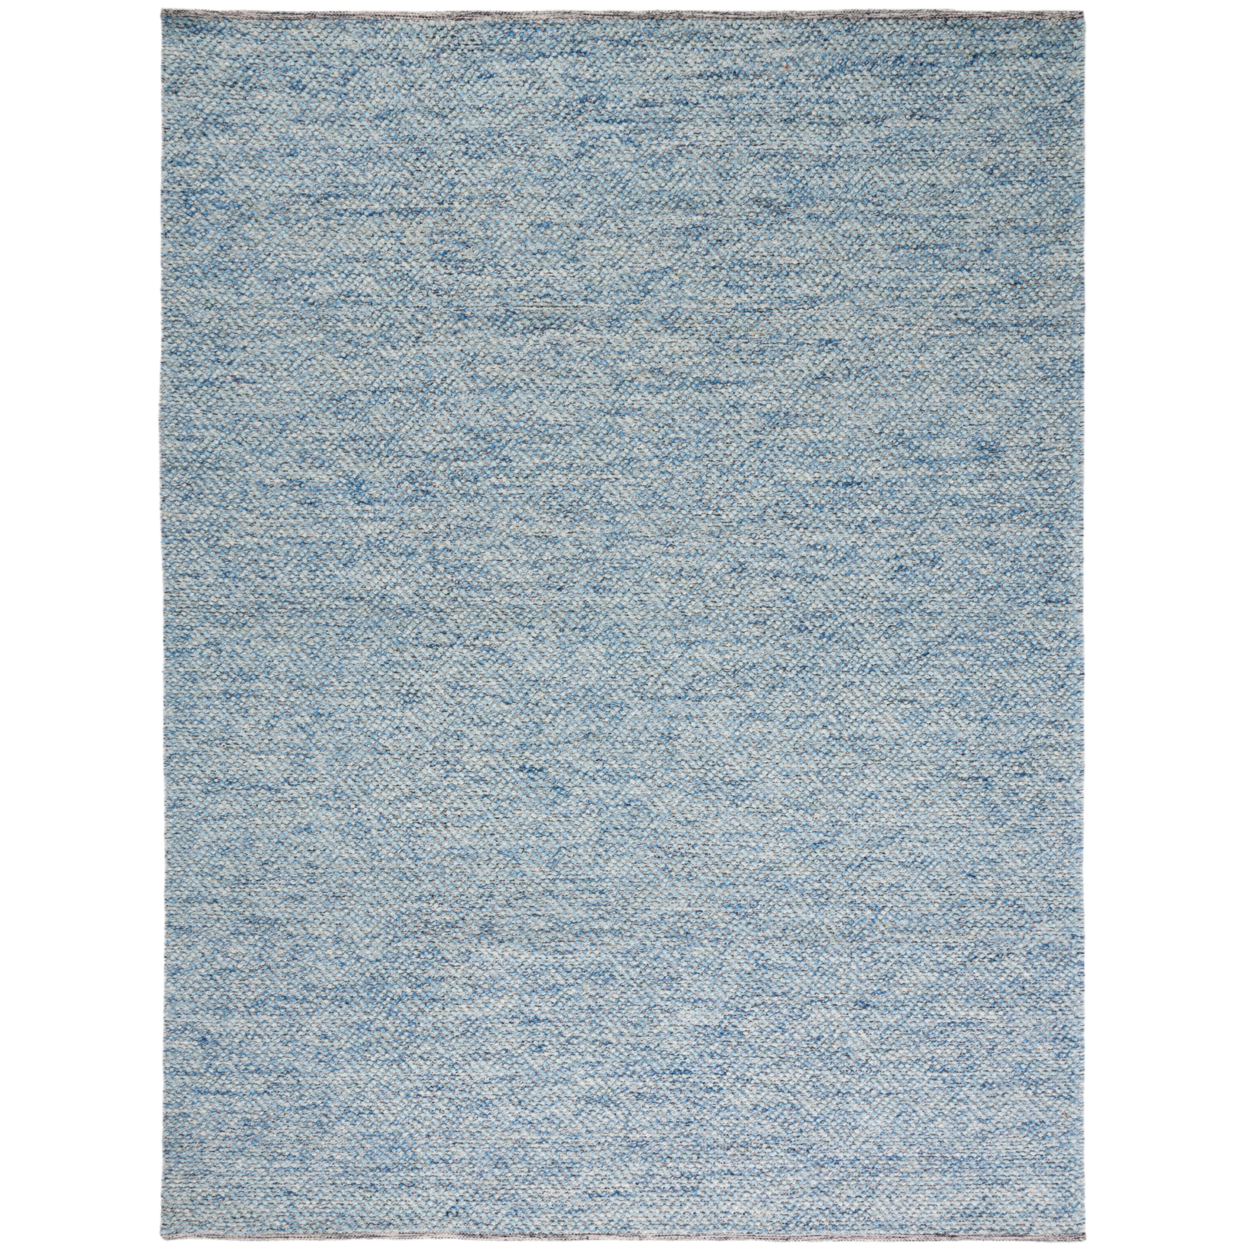 SAFAVIEH Natura Collection NAT503B Handwoven Blue Rug - 7' Square